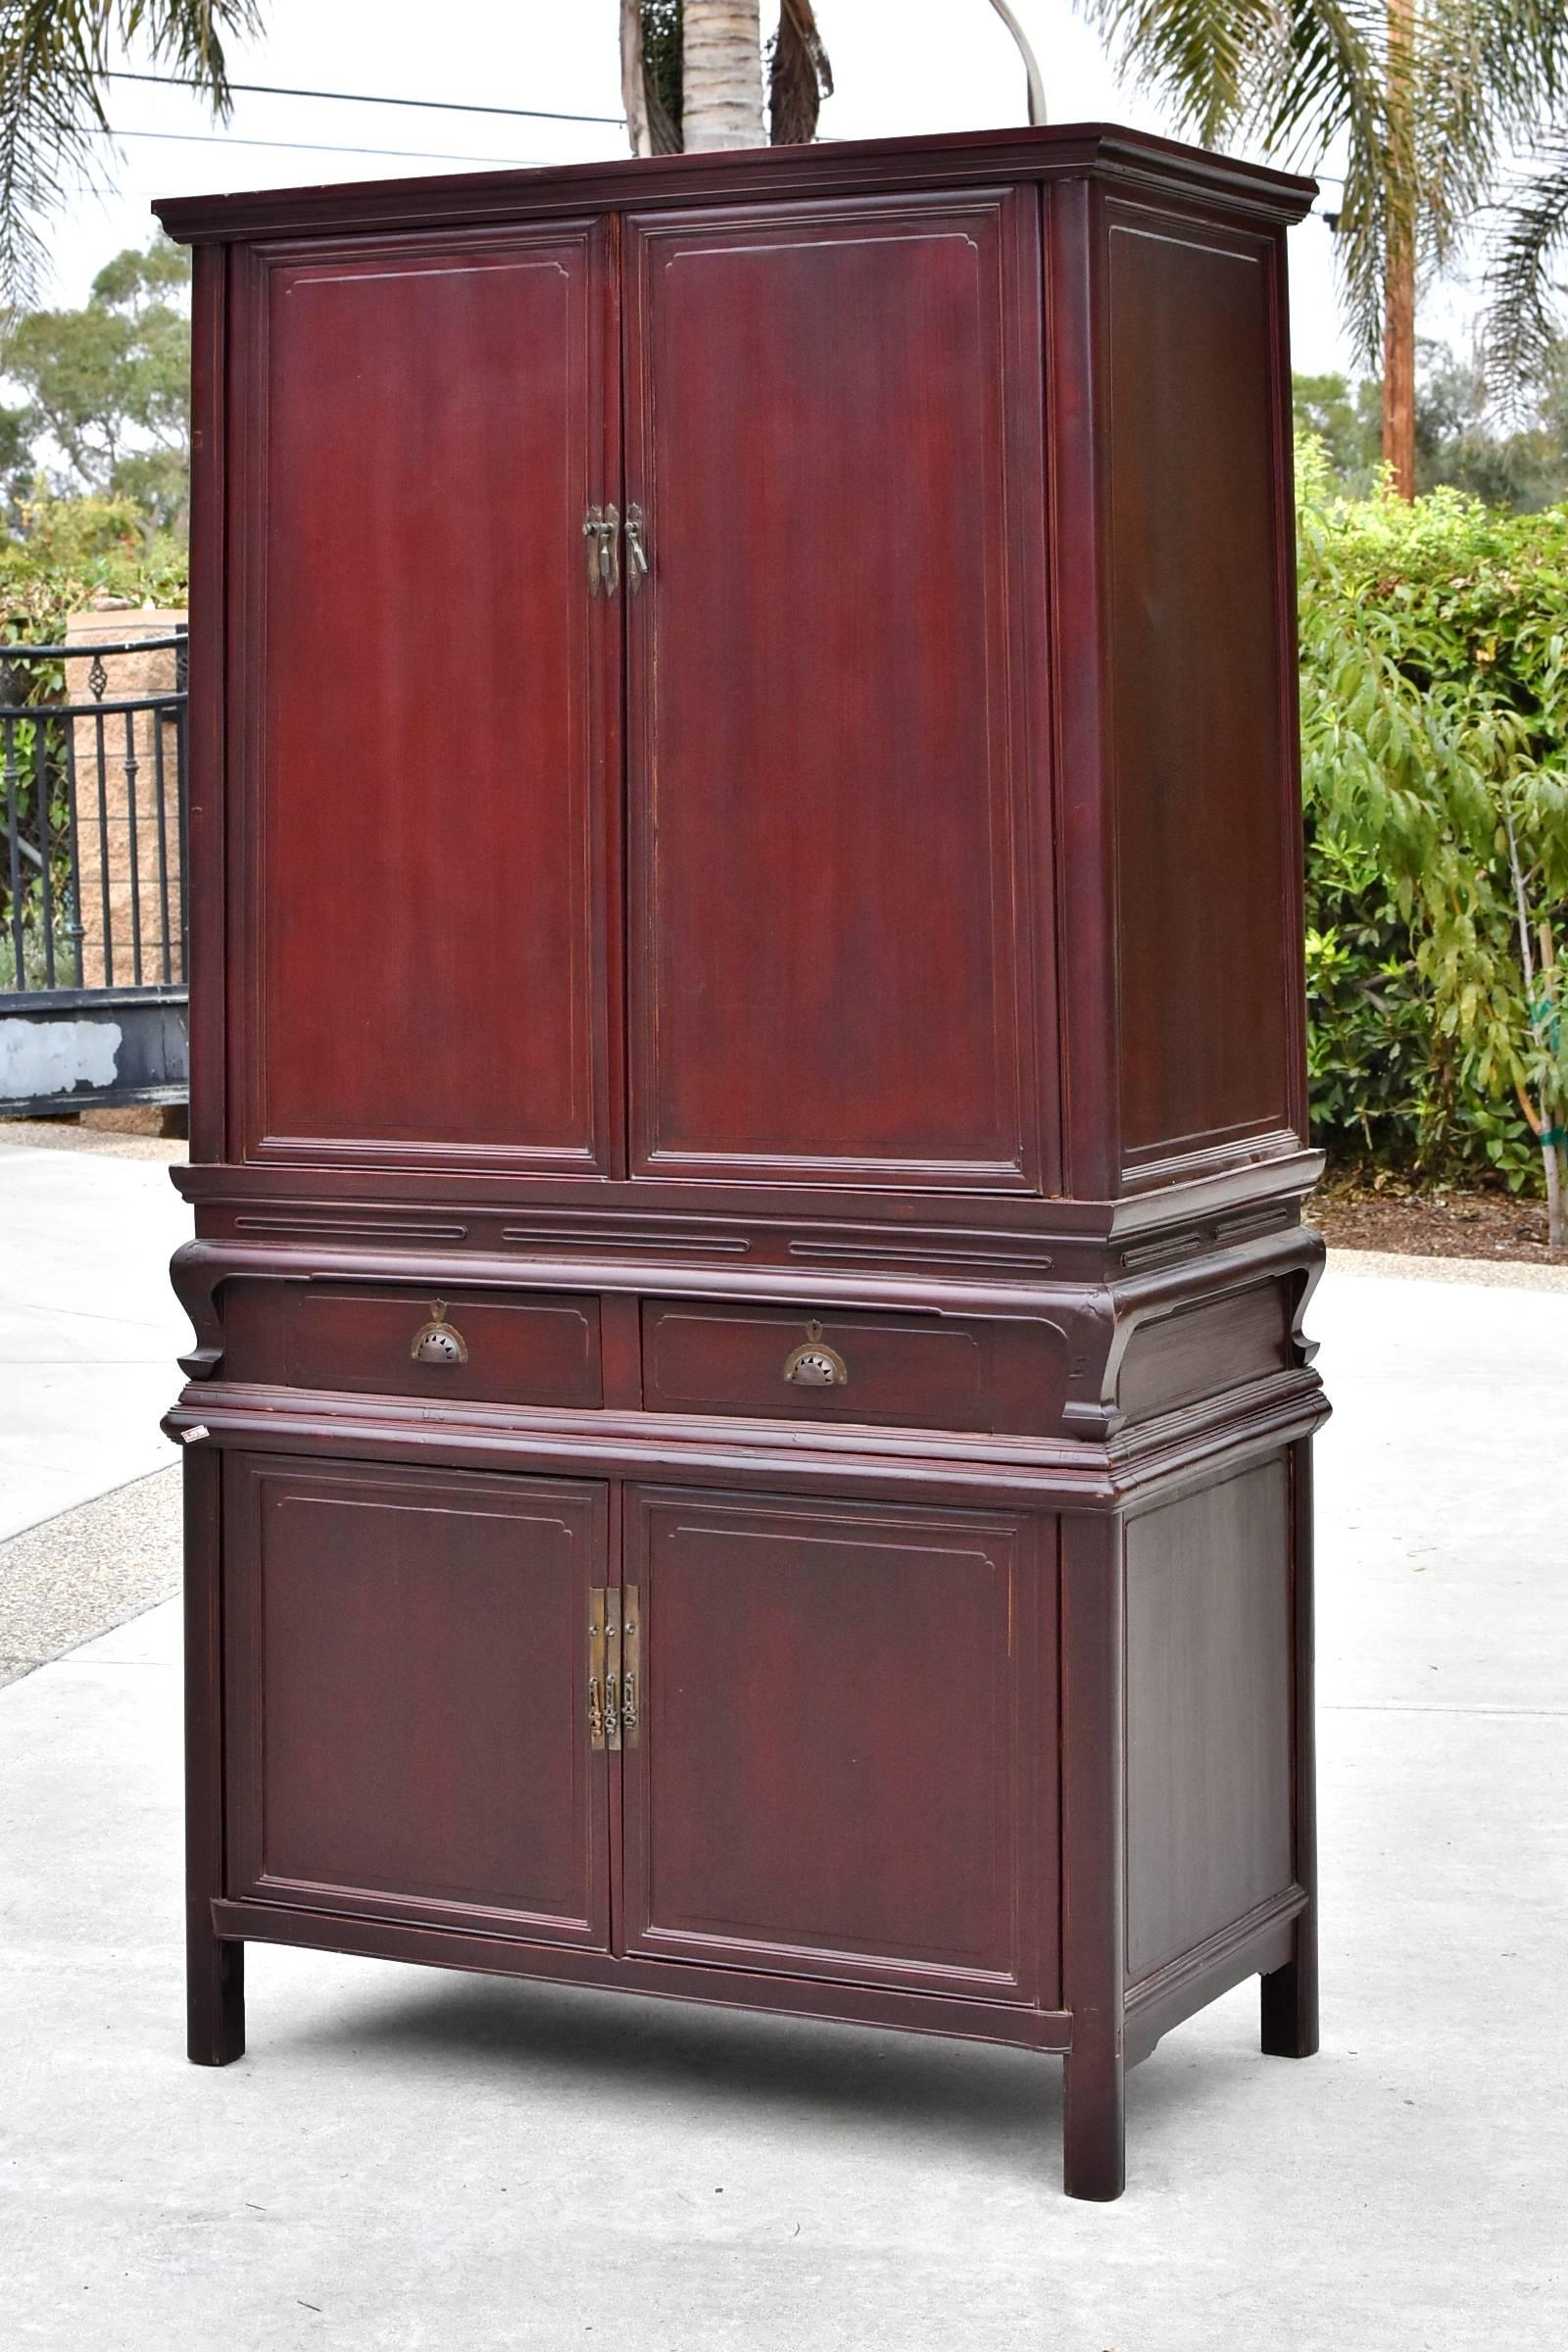 A special two-tiered cabinet. The finish is a beautiful deep plum color. The carvings are delicate, simple and graceful with thin, elegant lines and subdued ruyi motifs carved on the corners. The two tiers separate and can be used individually. This